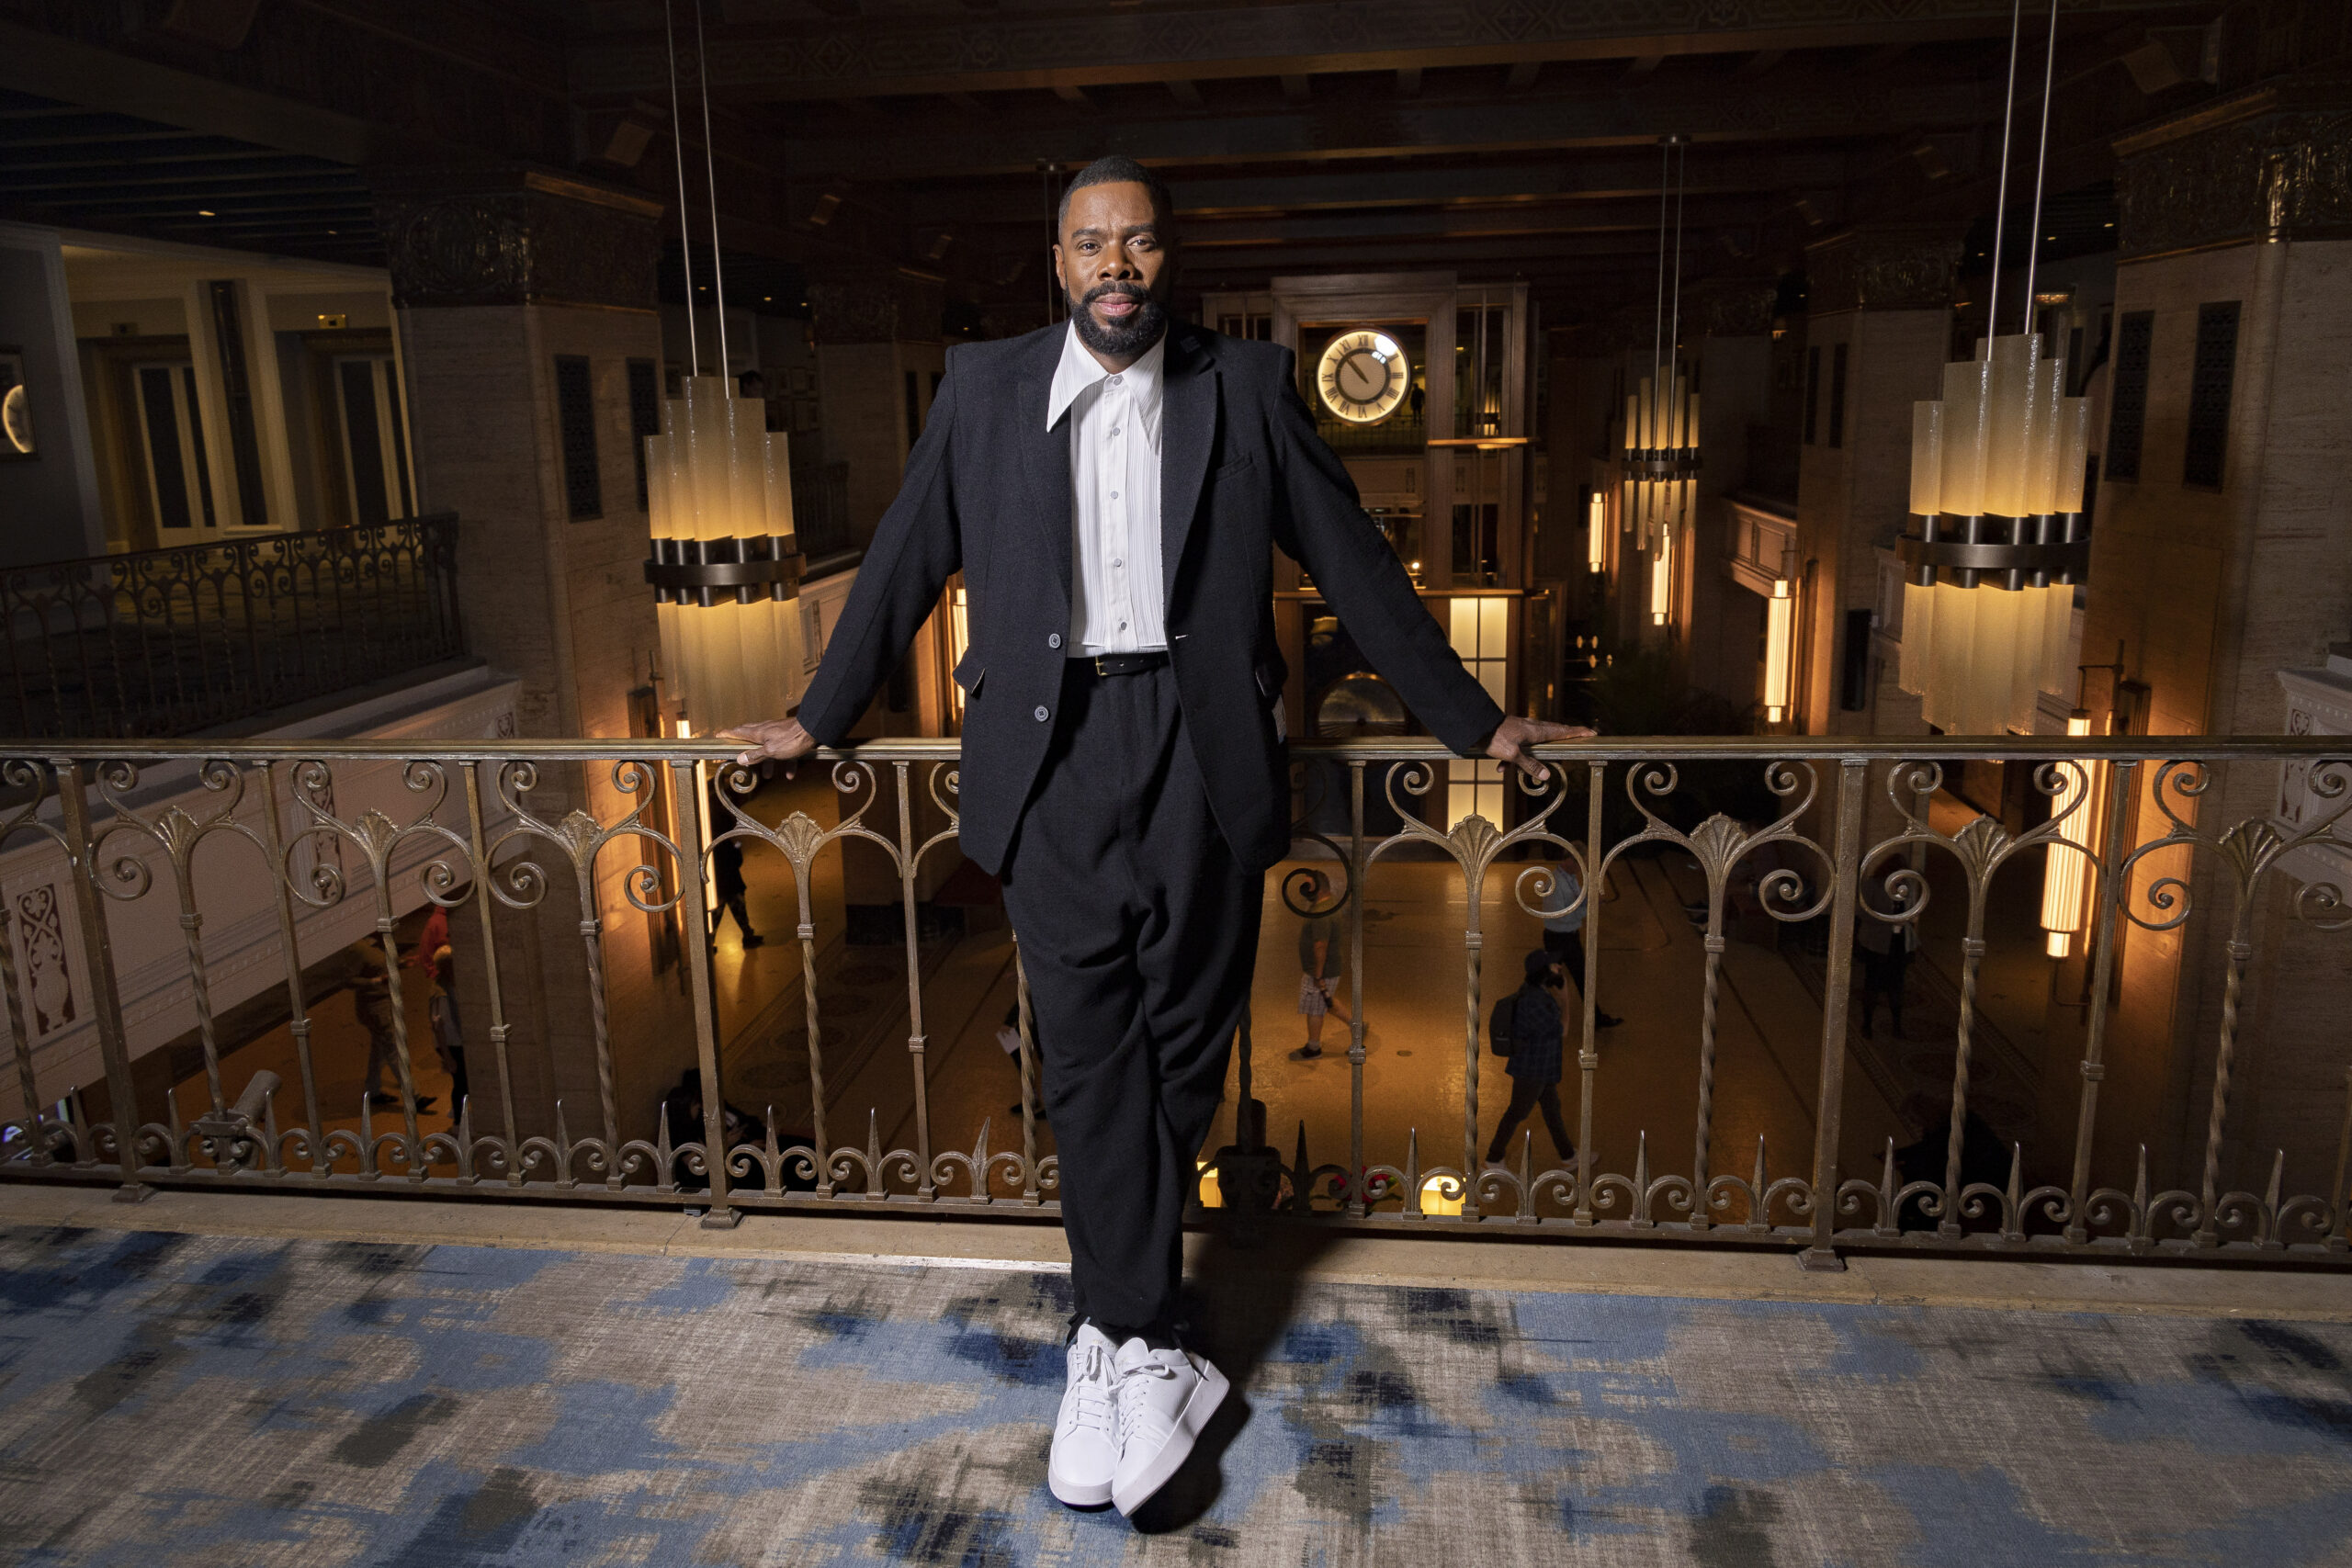 Colman Domingo poses for a portrait to promote the film "Sing Sing" during the Toronto International Film Festival, Sunday, Sept. 10, 2023, in Toronto. Photo credit: Joel C Ryan, Invision, The Associated Press